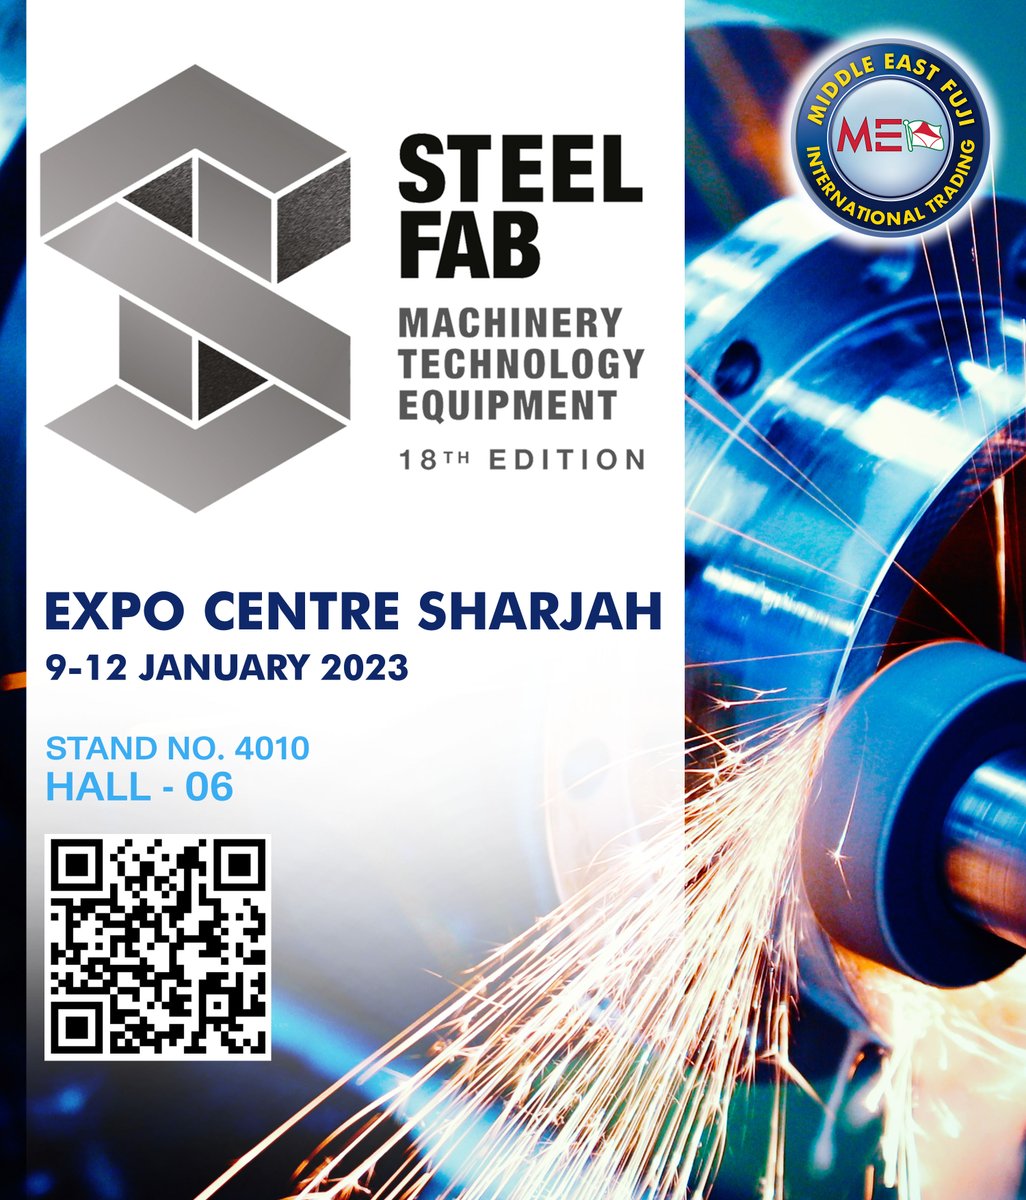 MEF Industrial Solution is thrilled to be exhibiting at STEEL FAB 2023!

Expo Centre Sharjah 
Stand no: 4010, Hall: 06
(9th to 12th January)

#SteelFab #SteelFab23 #Steel #Metal #Fiber #Fabrication #punchingtools #Machinery #Tools #Innovation #Technology #punchingmachine